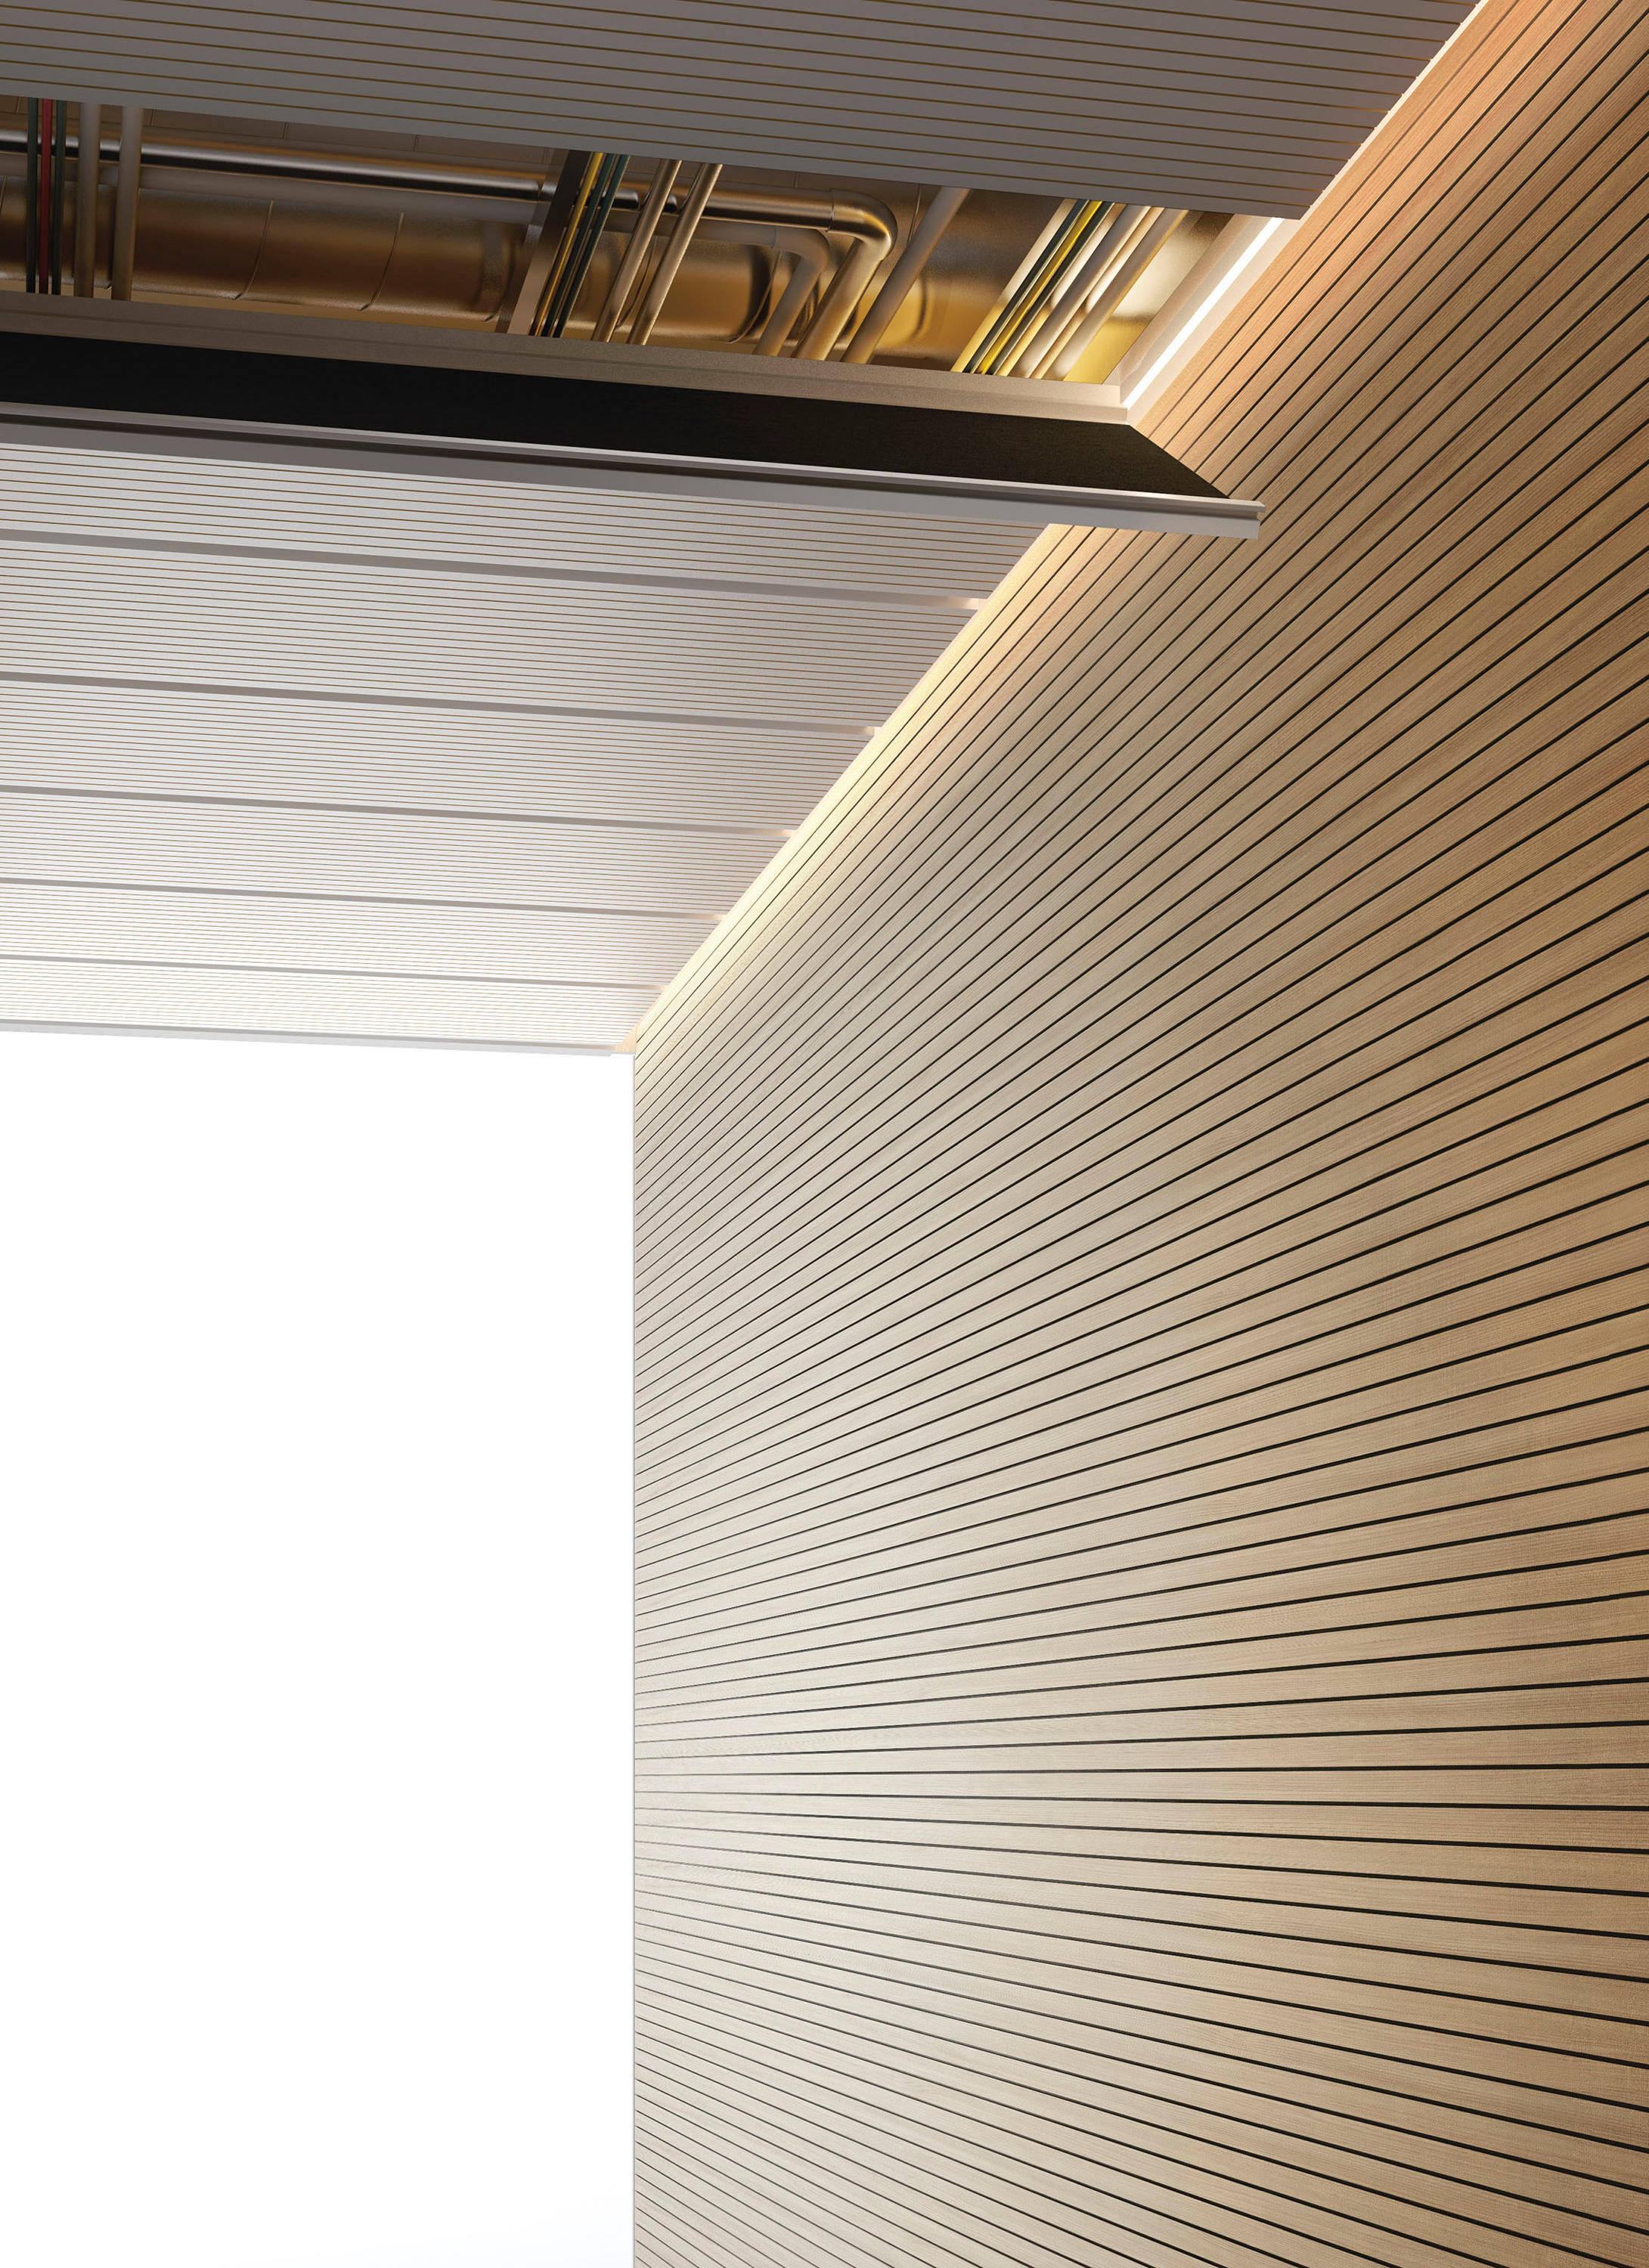 Easy Access Suspended Ceilings From Fantoni Architonic